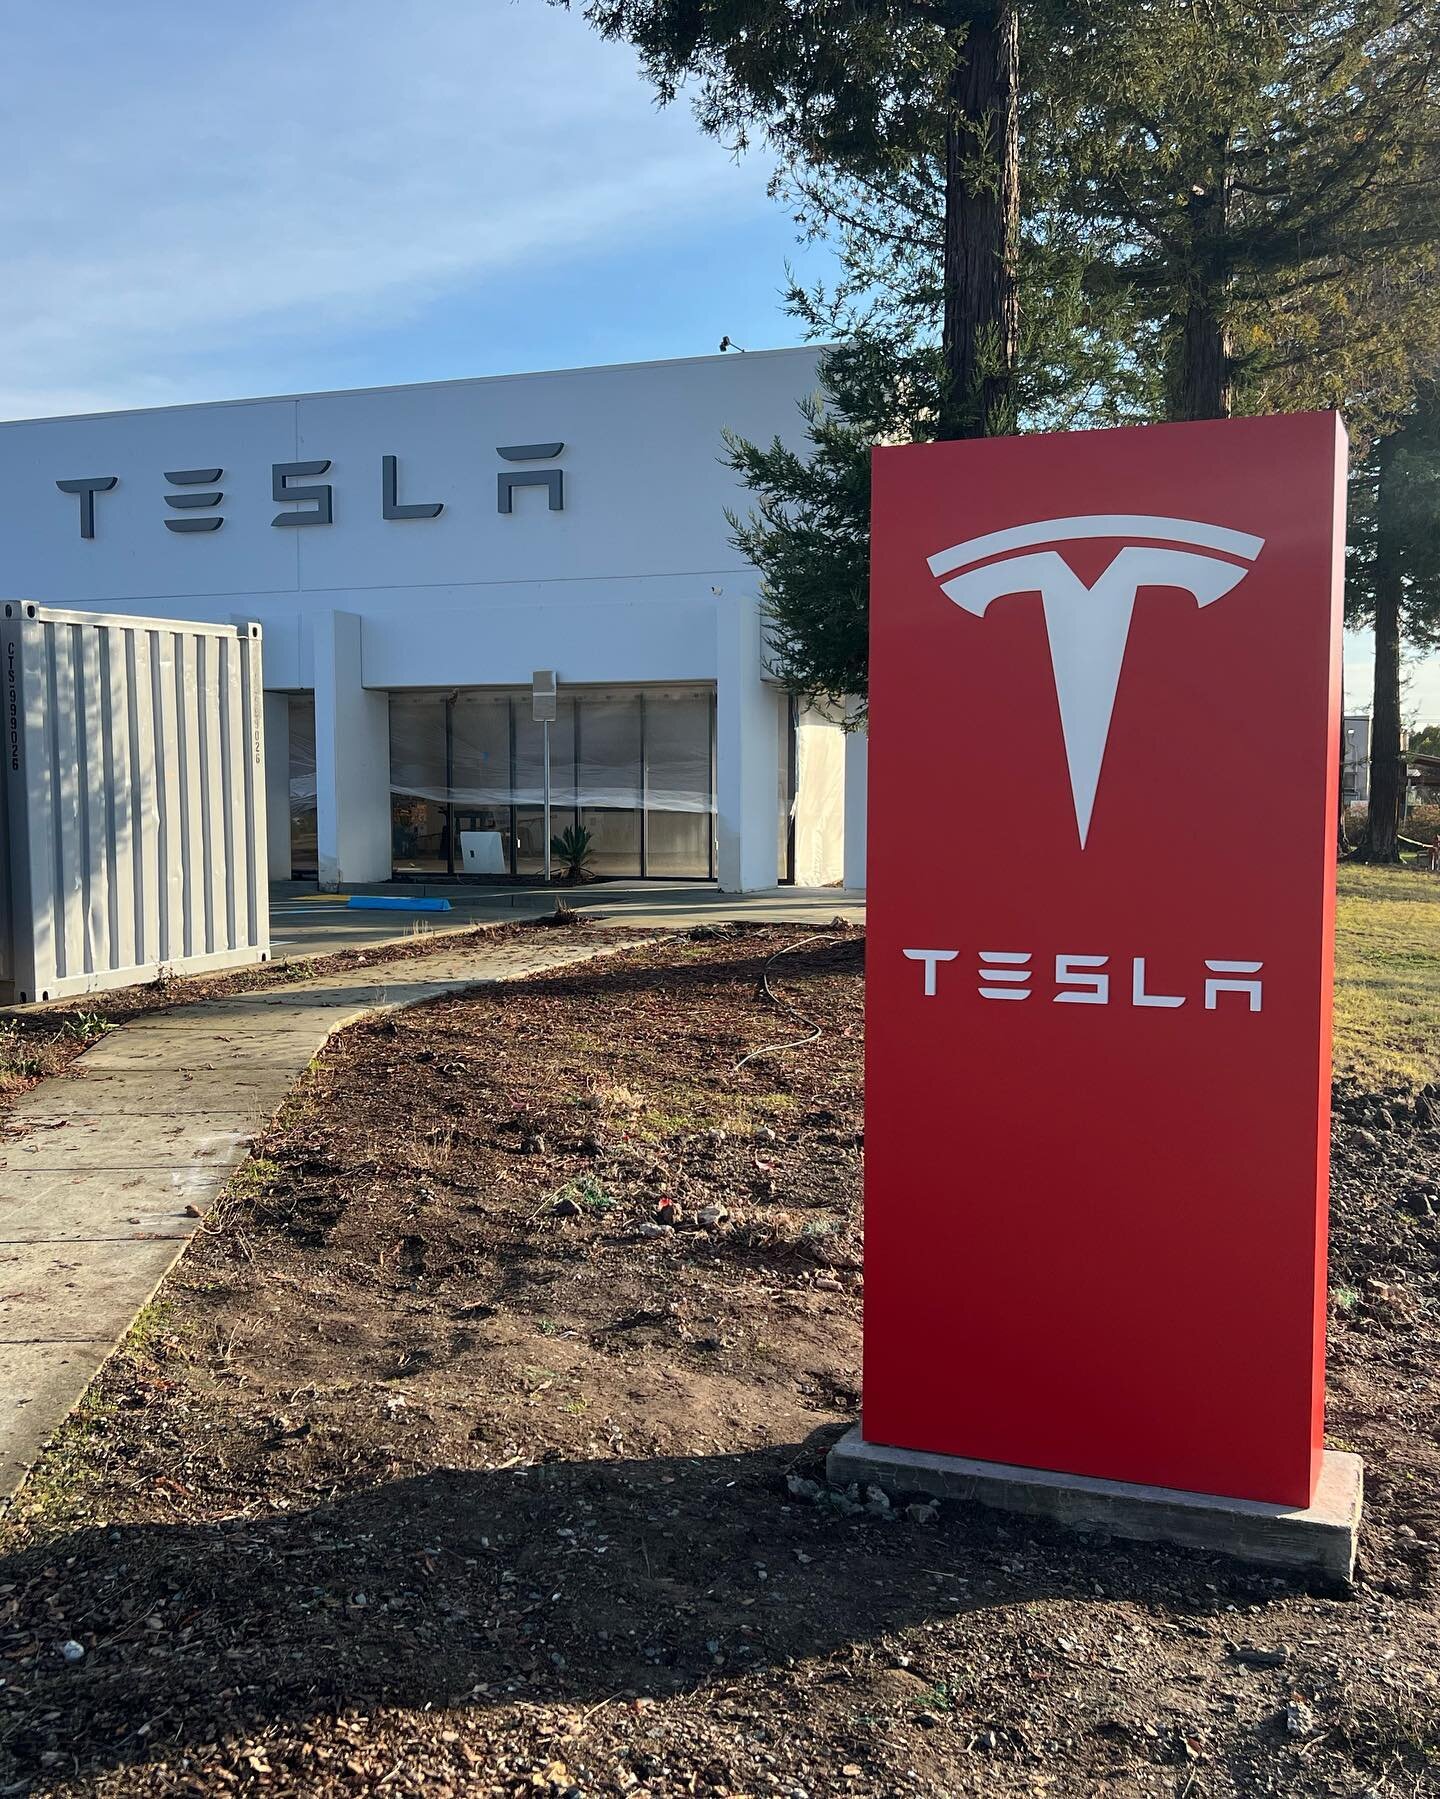 @tesla coming soon to Santa Rosa. Signs beautifully made by @signtechusa and installed by @johnstonsigns. The perfect pair for a perfect install :)